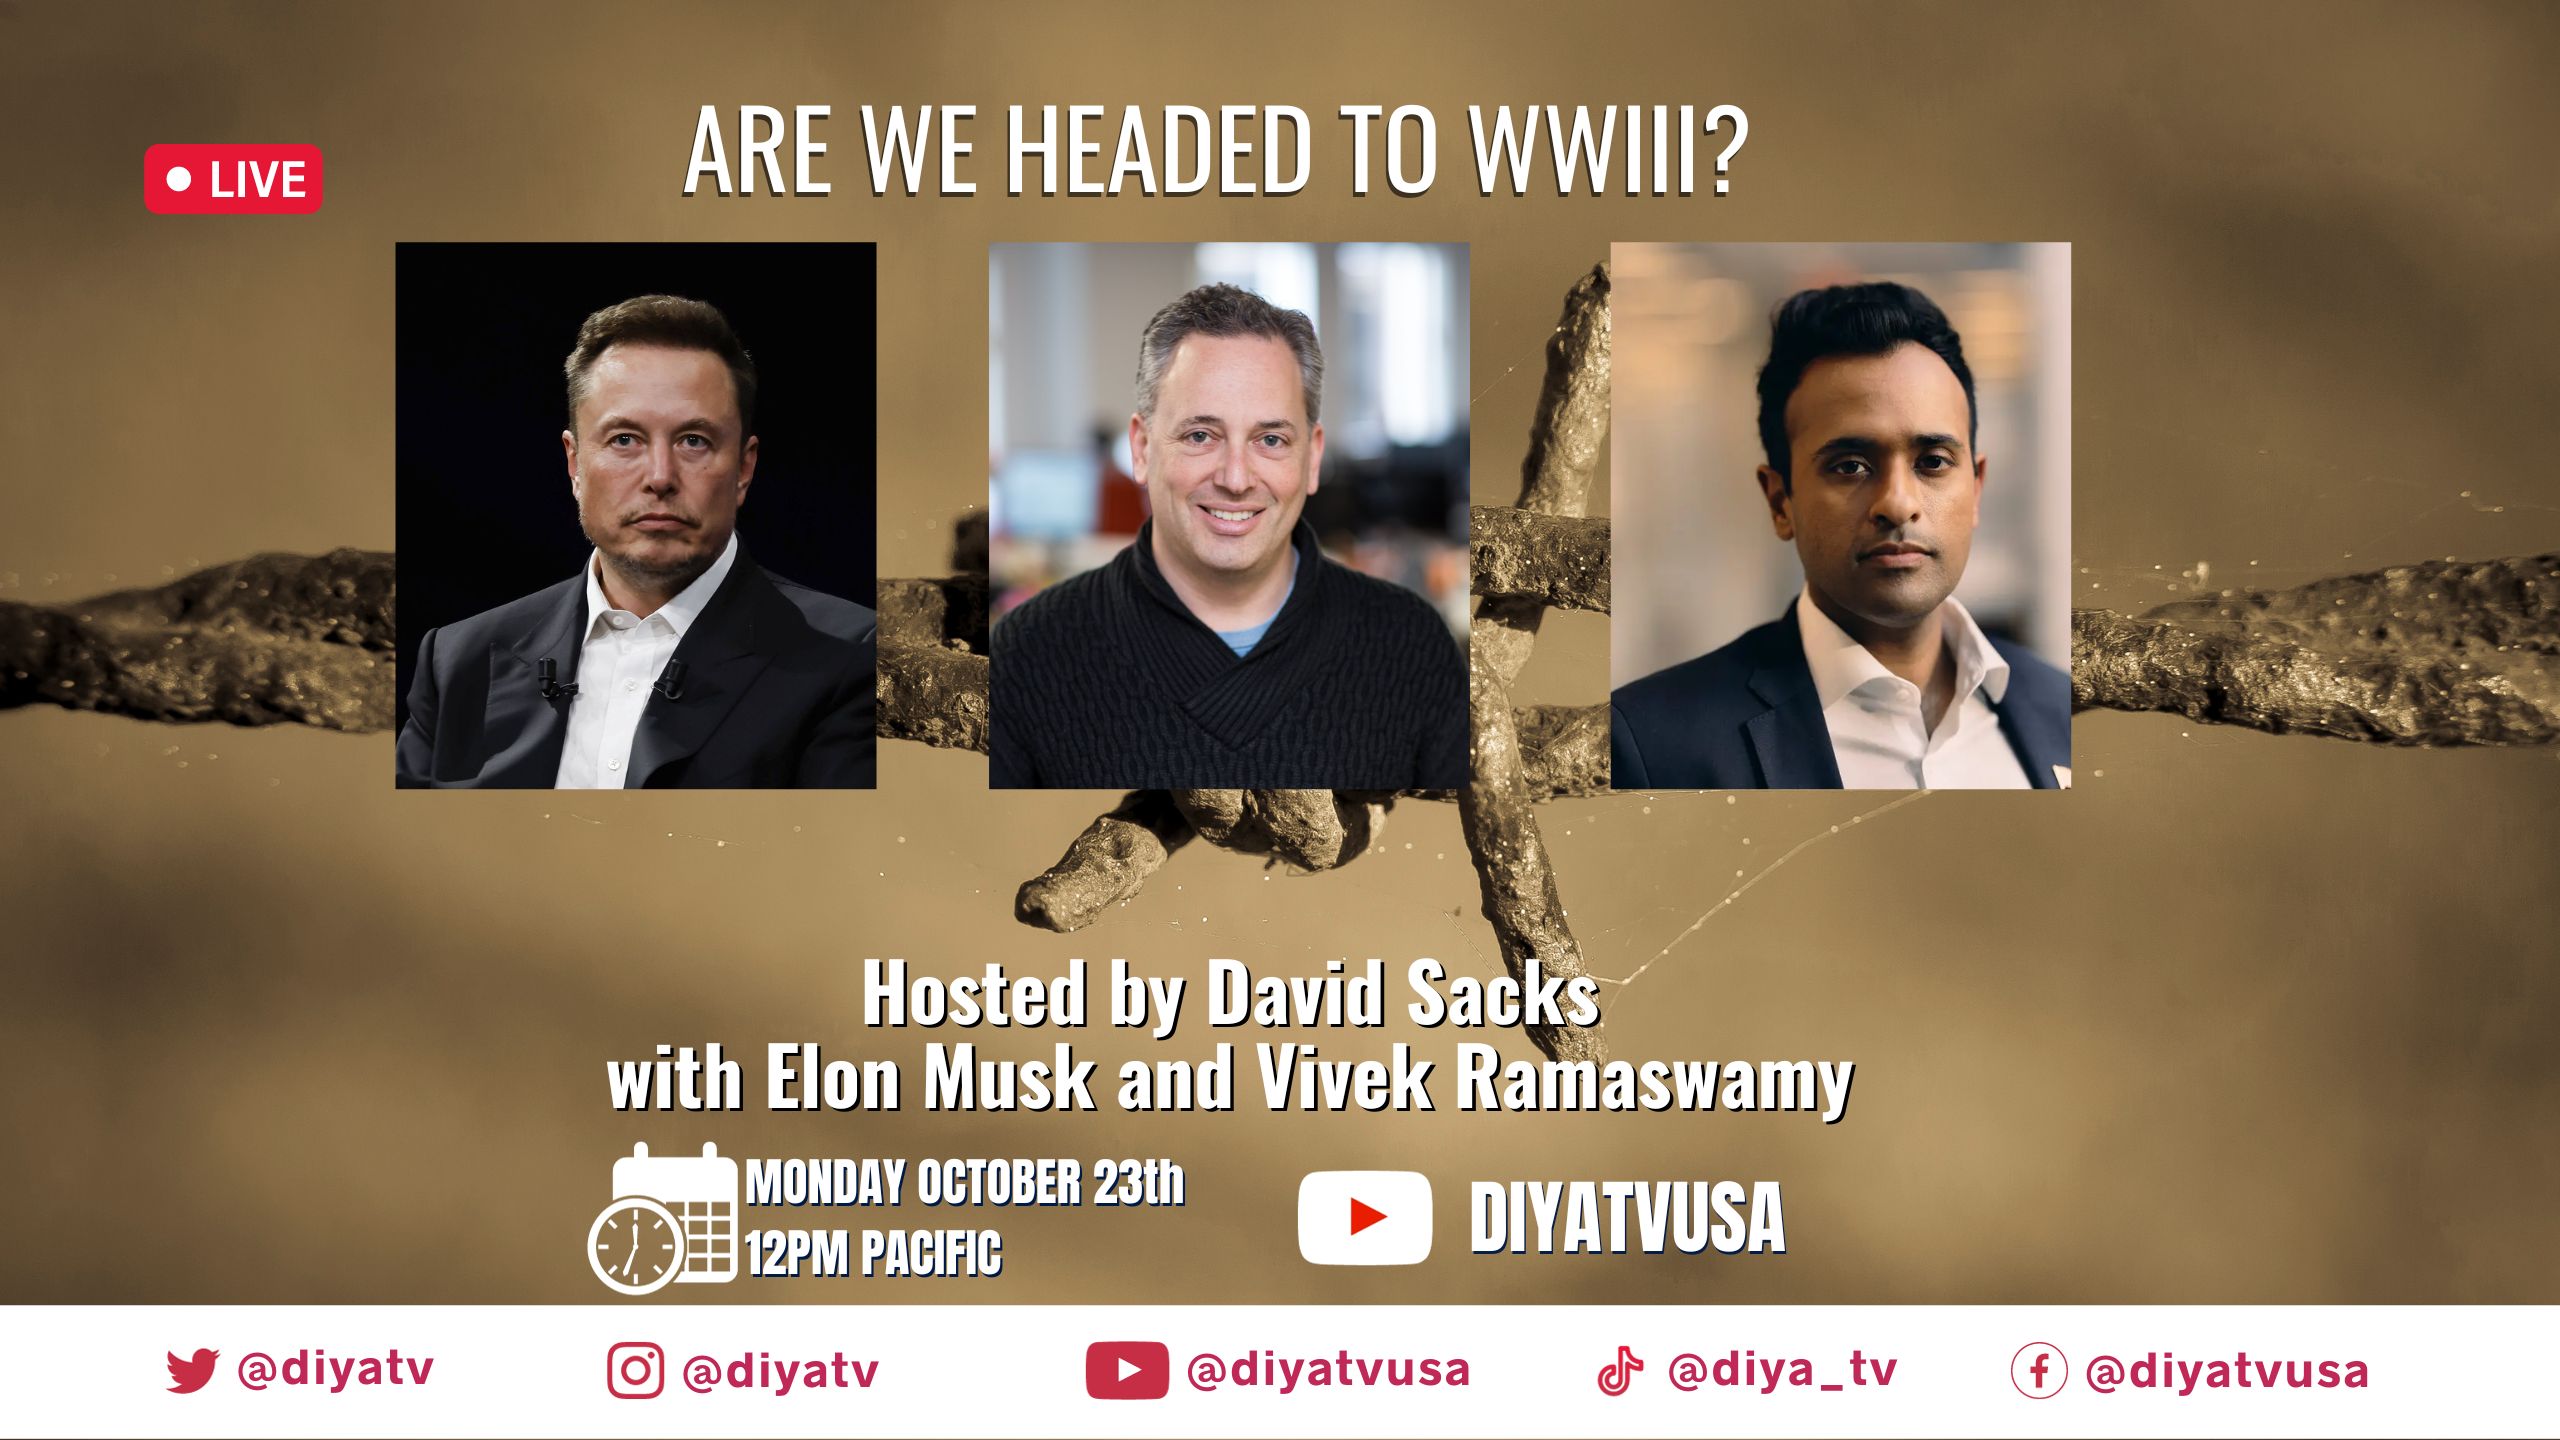 Musk calls for ceasefire to prevent world war III in talk with Ramaswamy, Sacks